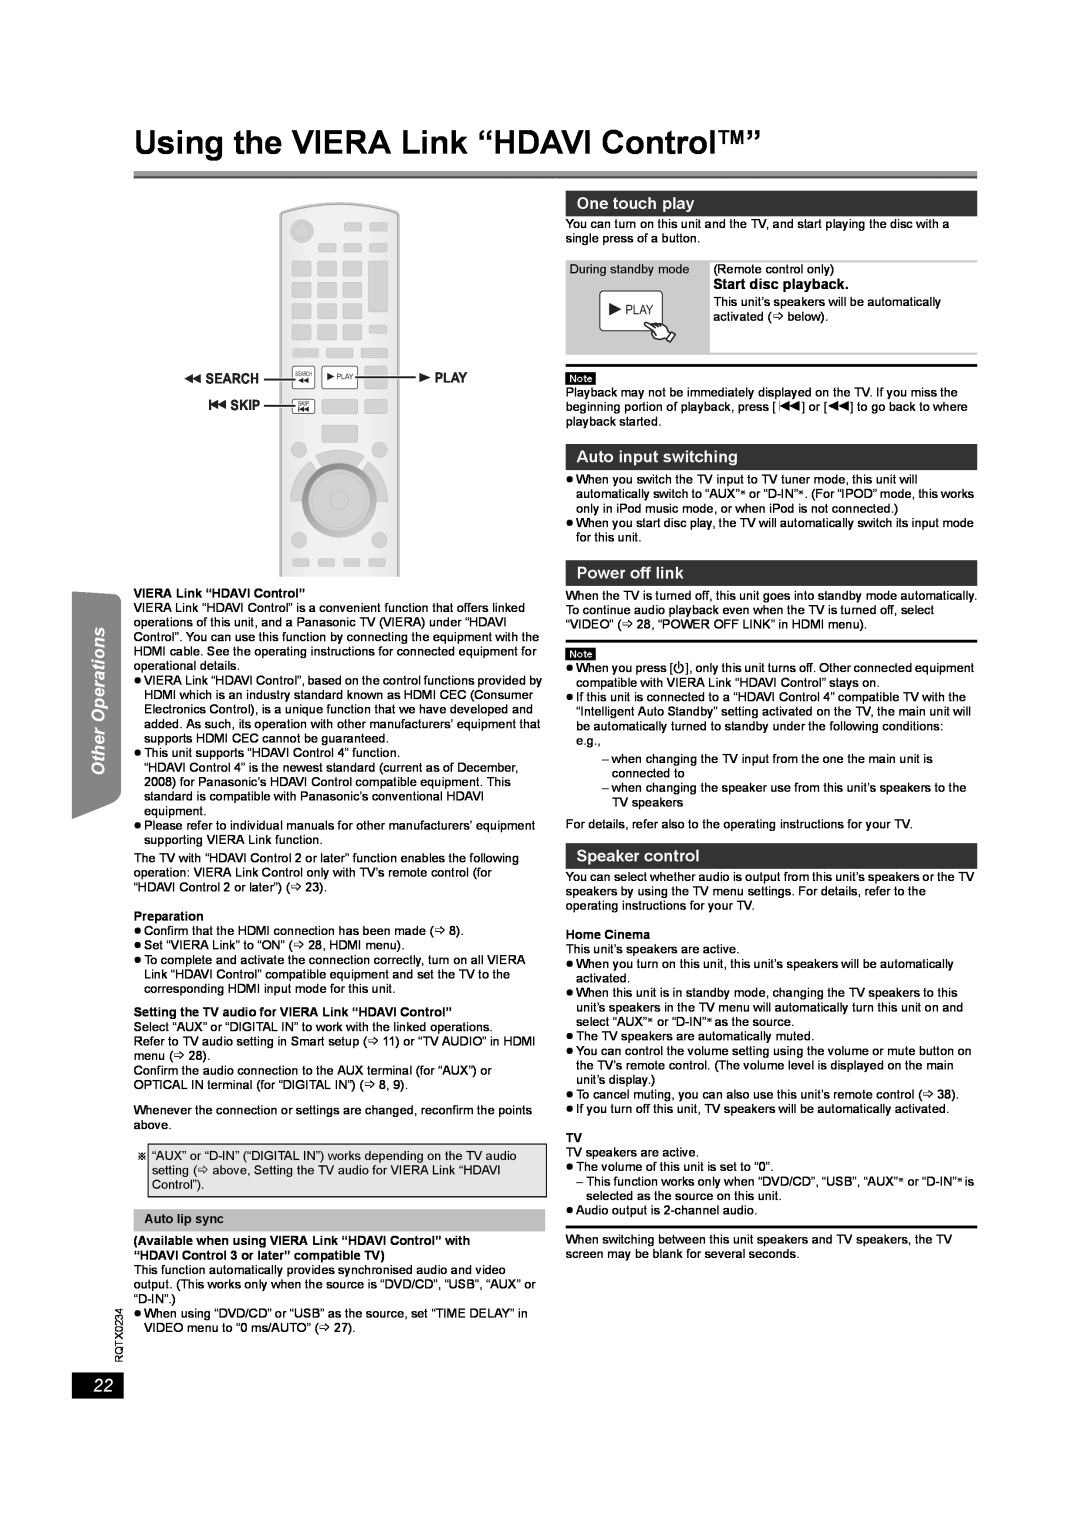 Panasonic SC-PT875 Using the VIERA Link “HDAVI ControlTM”, One touch play, Auto input switching, Power off link, Other 